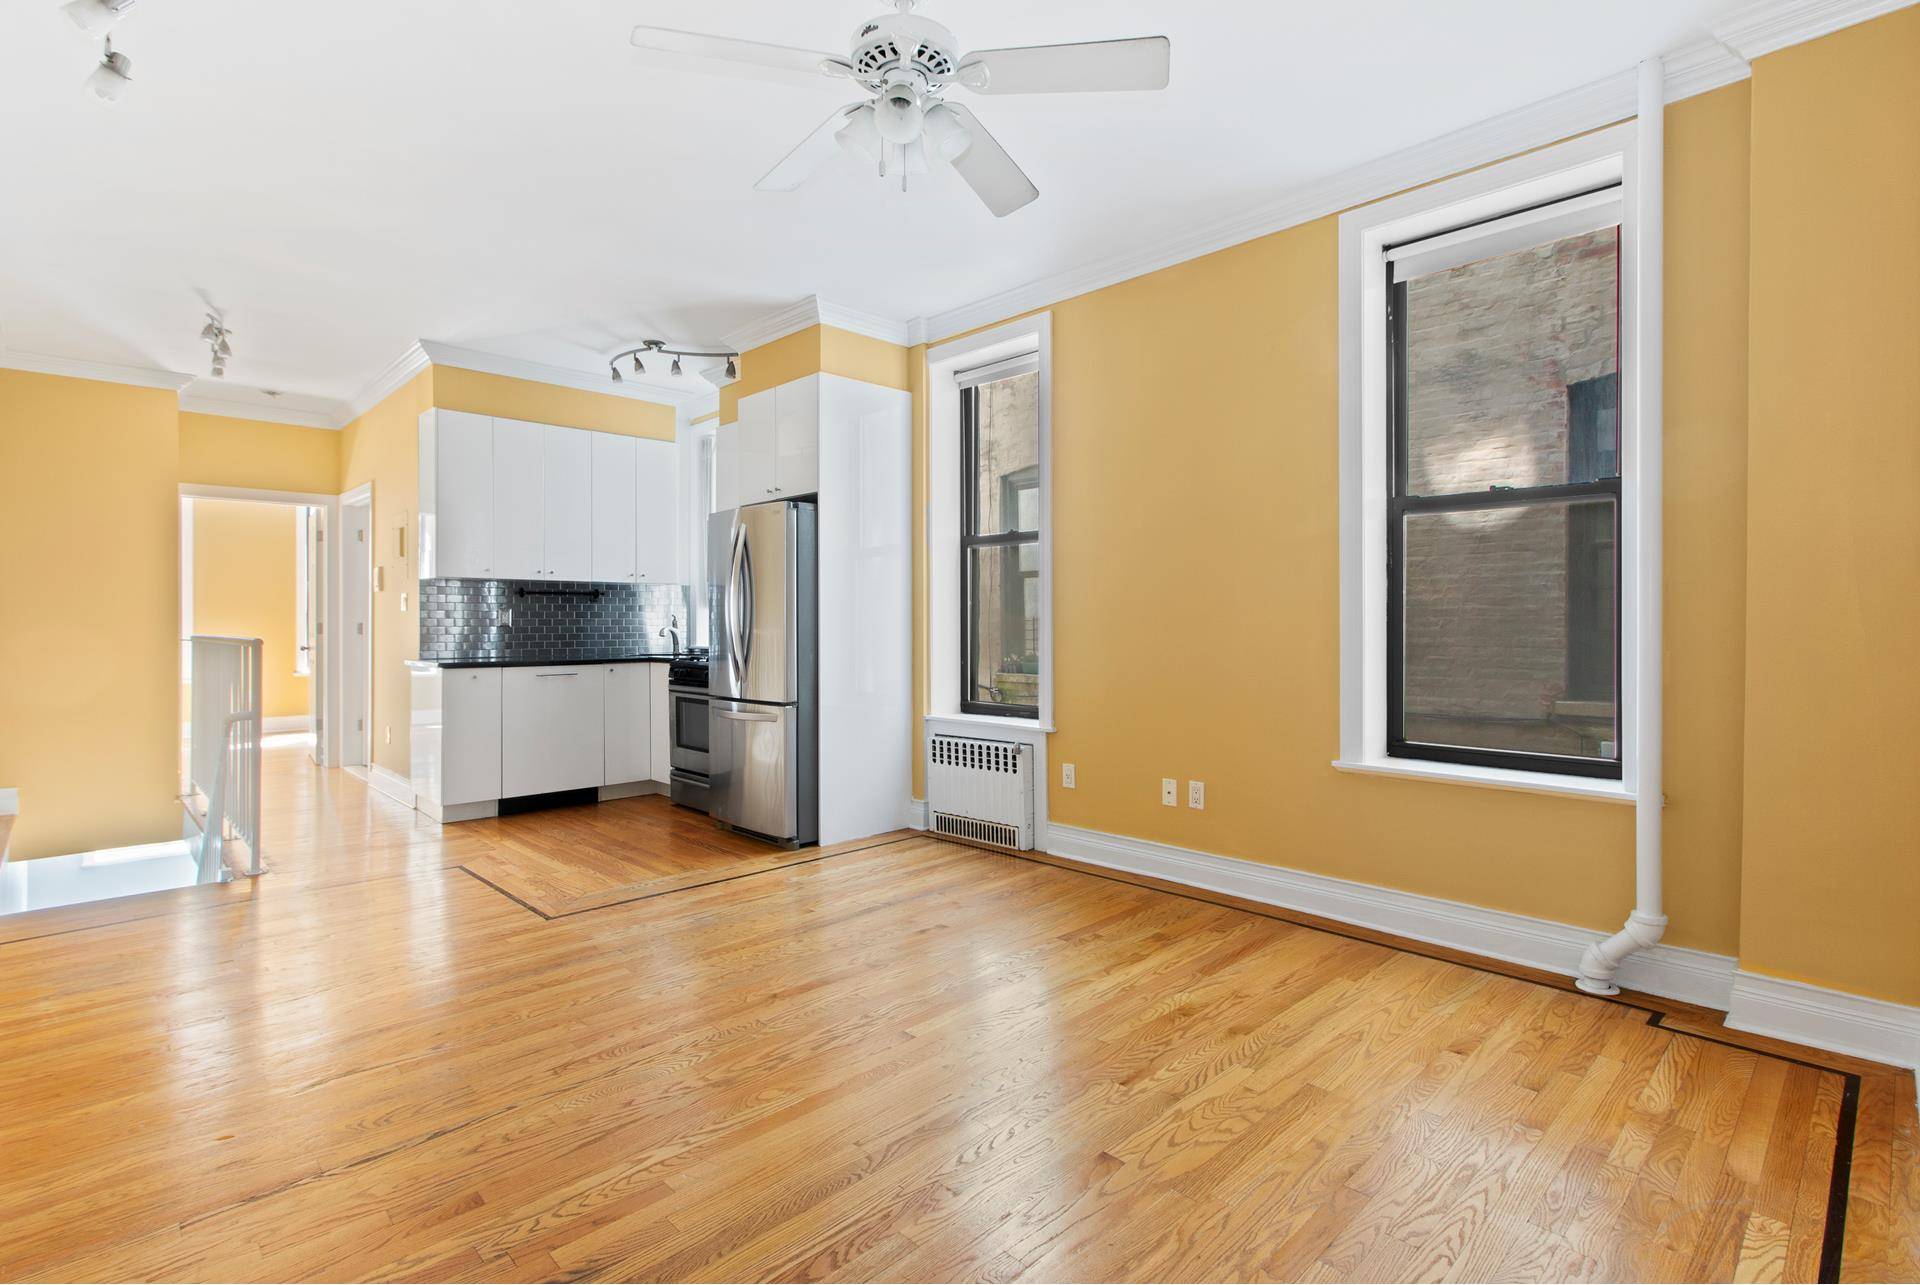 No. 3 is a duplex with private garden in a boutique condominium conversion, 466 15th Street, located just 1 2 block from Prospect Park.